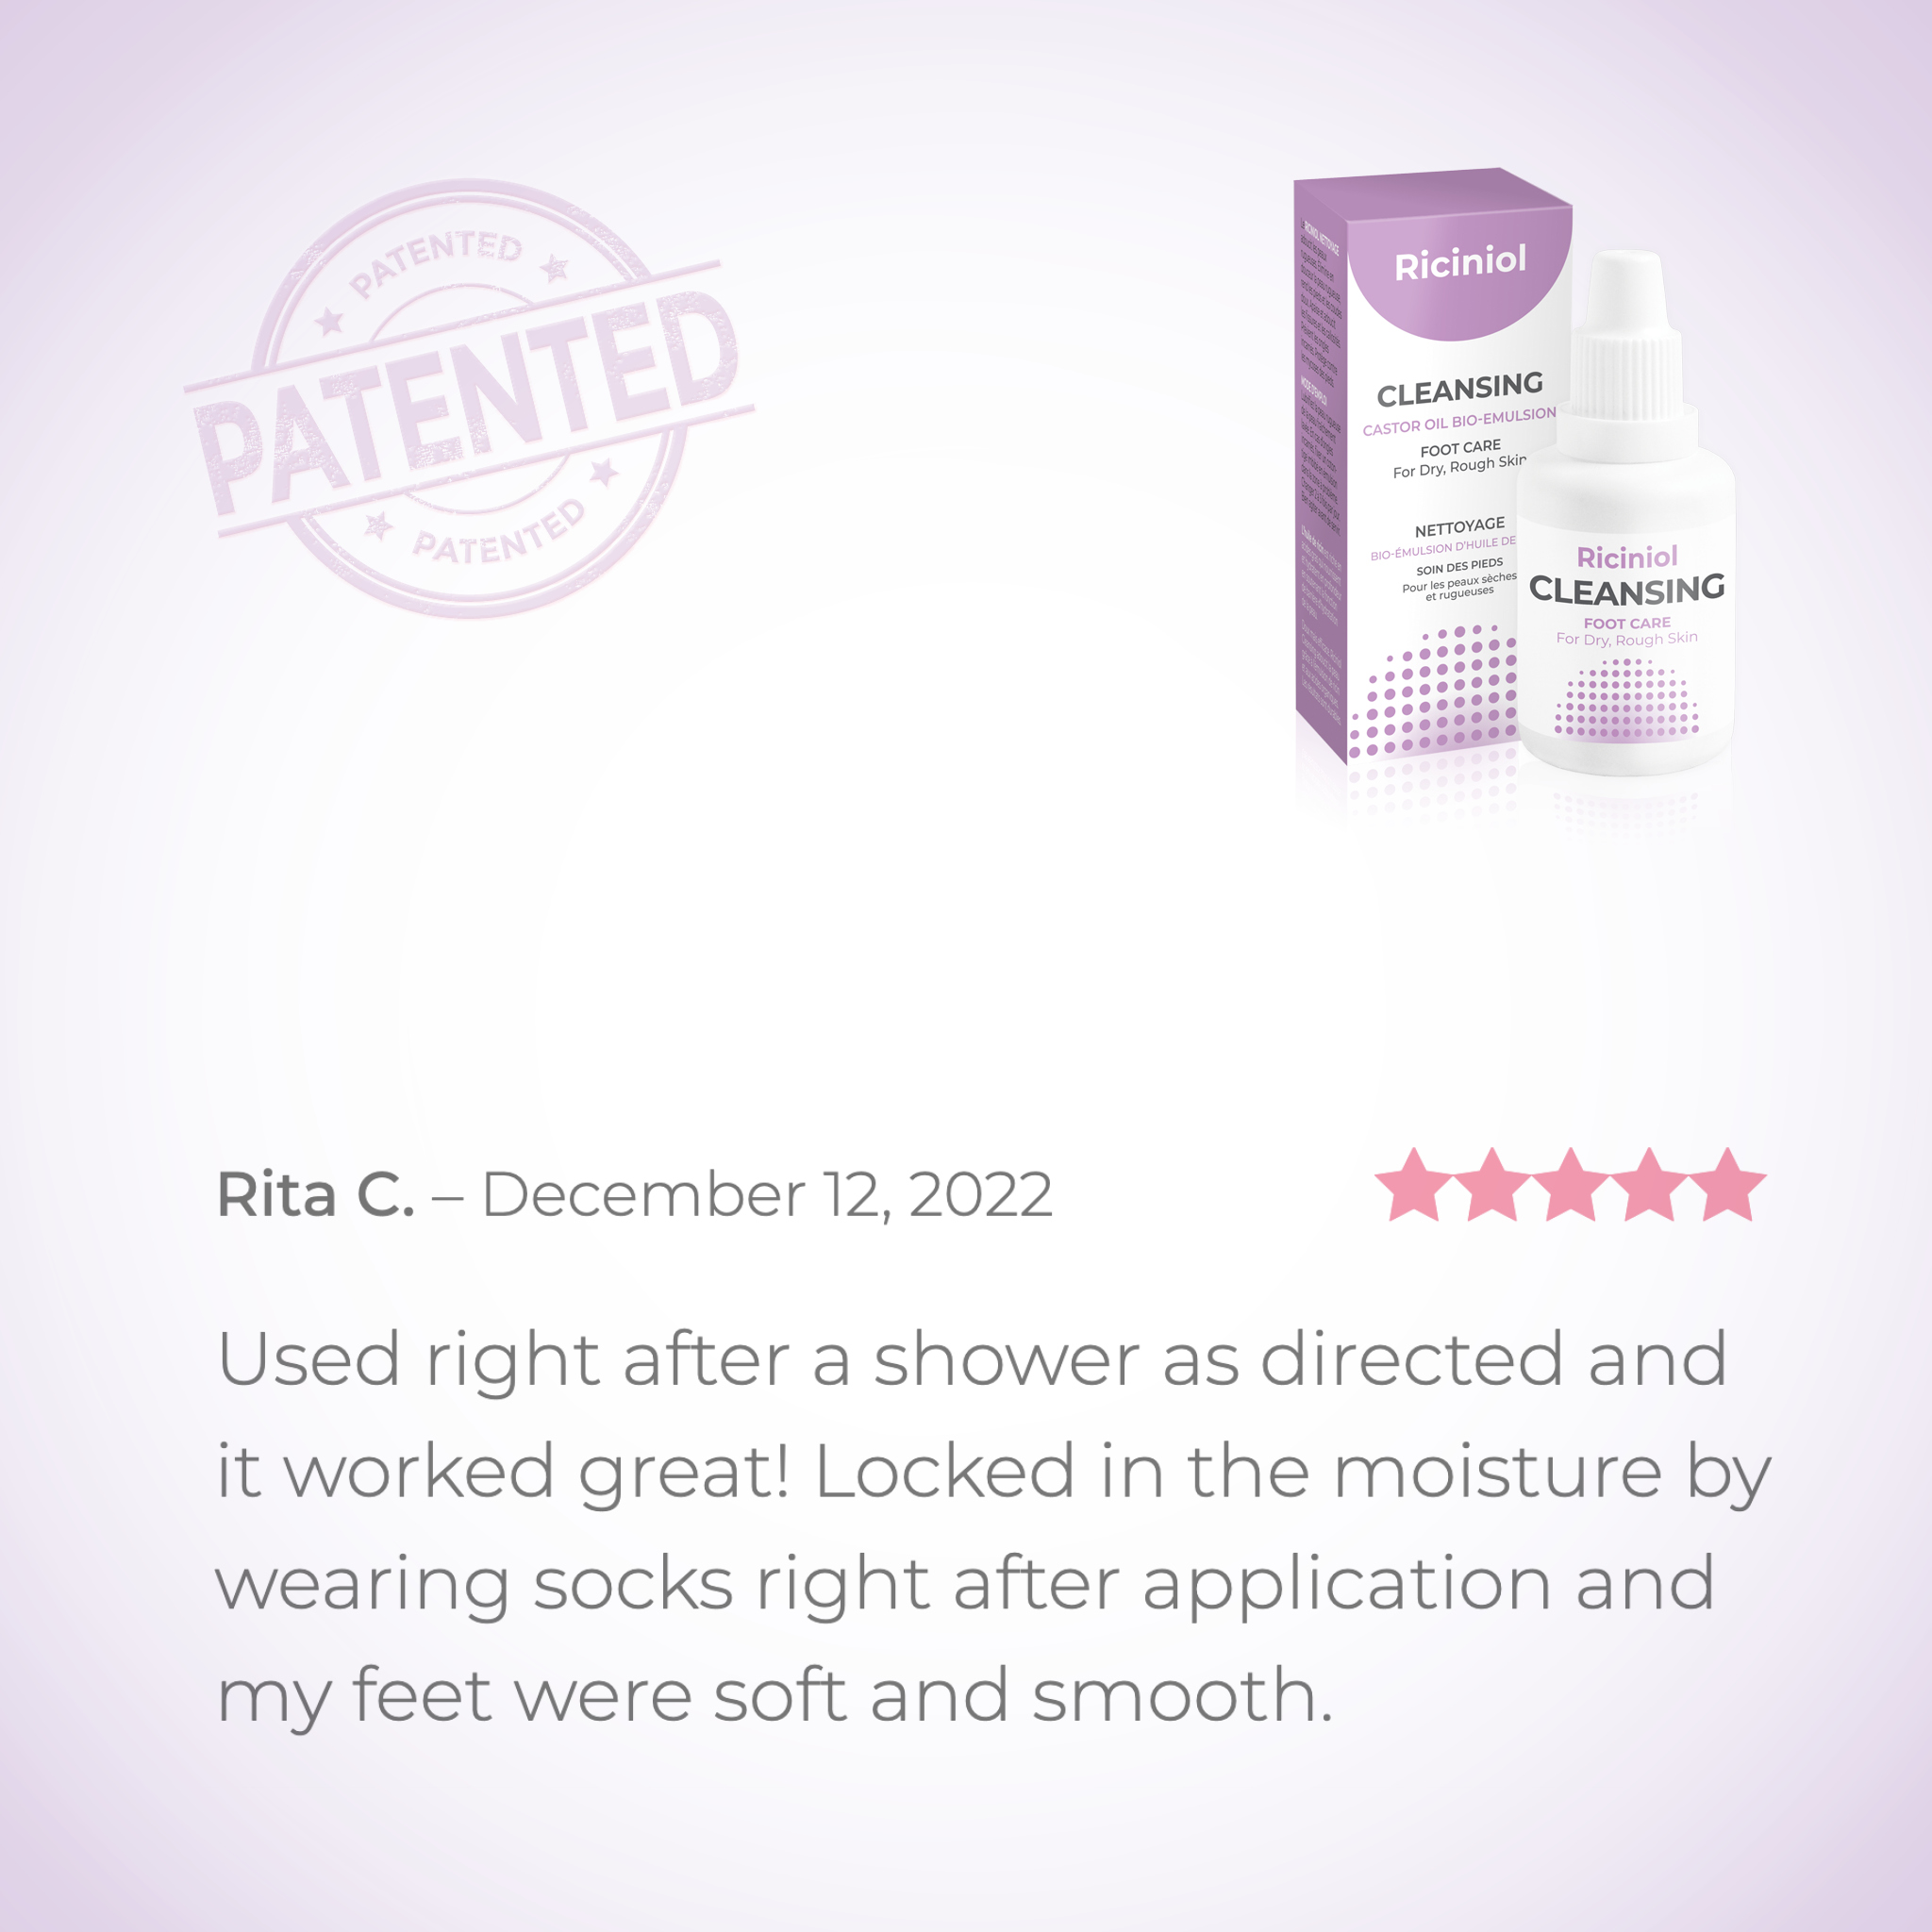 Riciniol Cleansing Used right after a shower as directed and it worked great! Locked in the moisture by wearing socks right after application and my feet were soft and smooth.